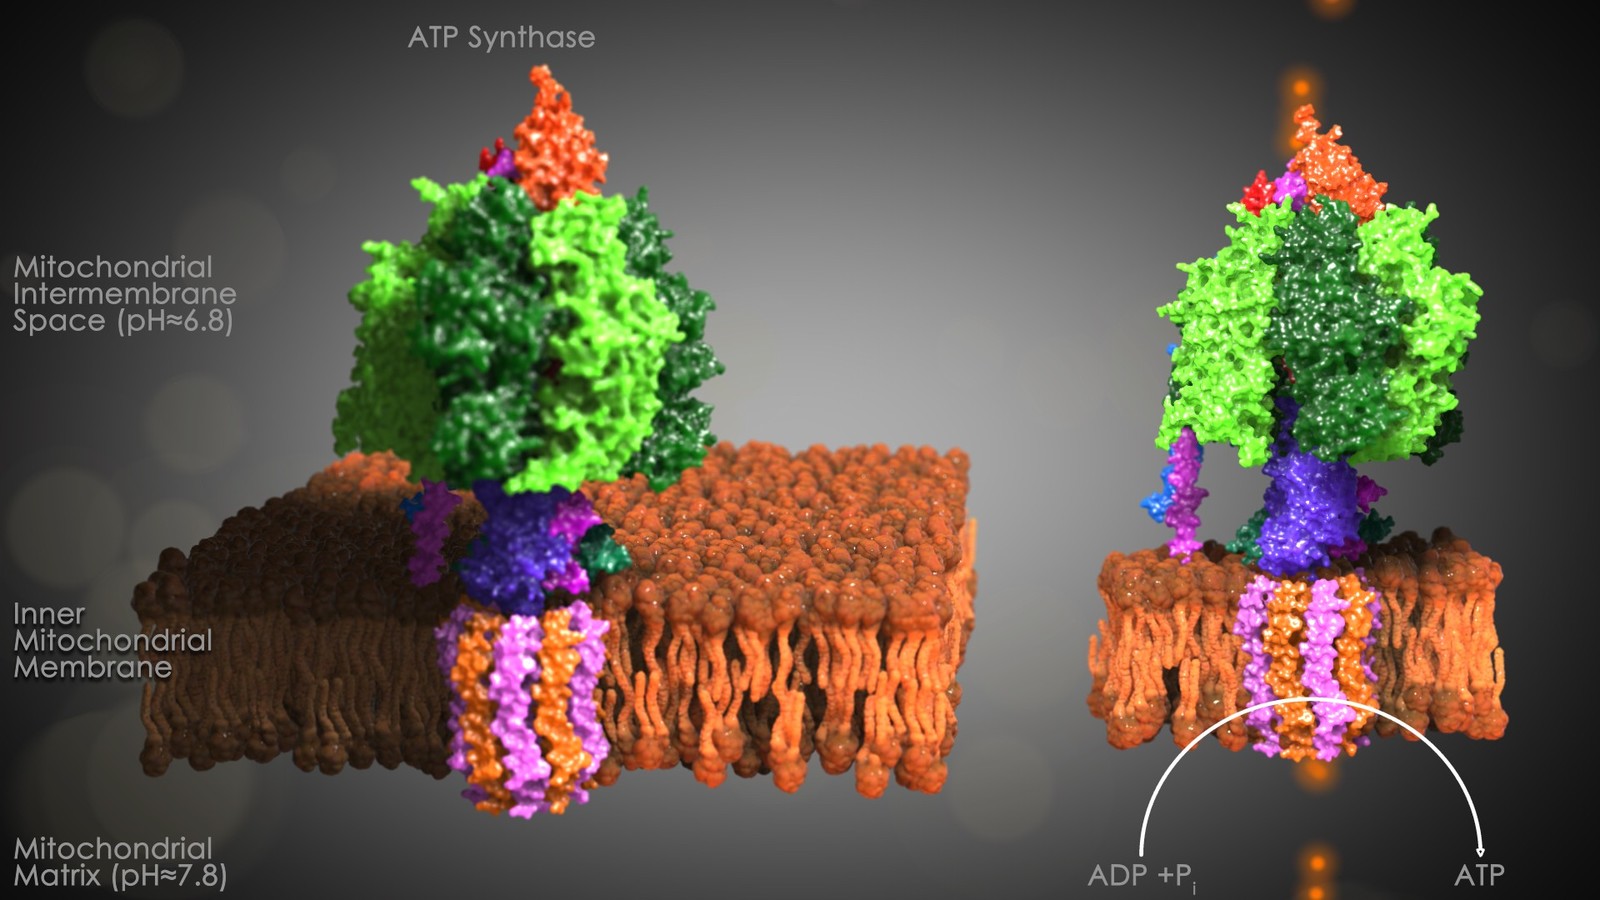 Mitochondrial ATP Synthase